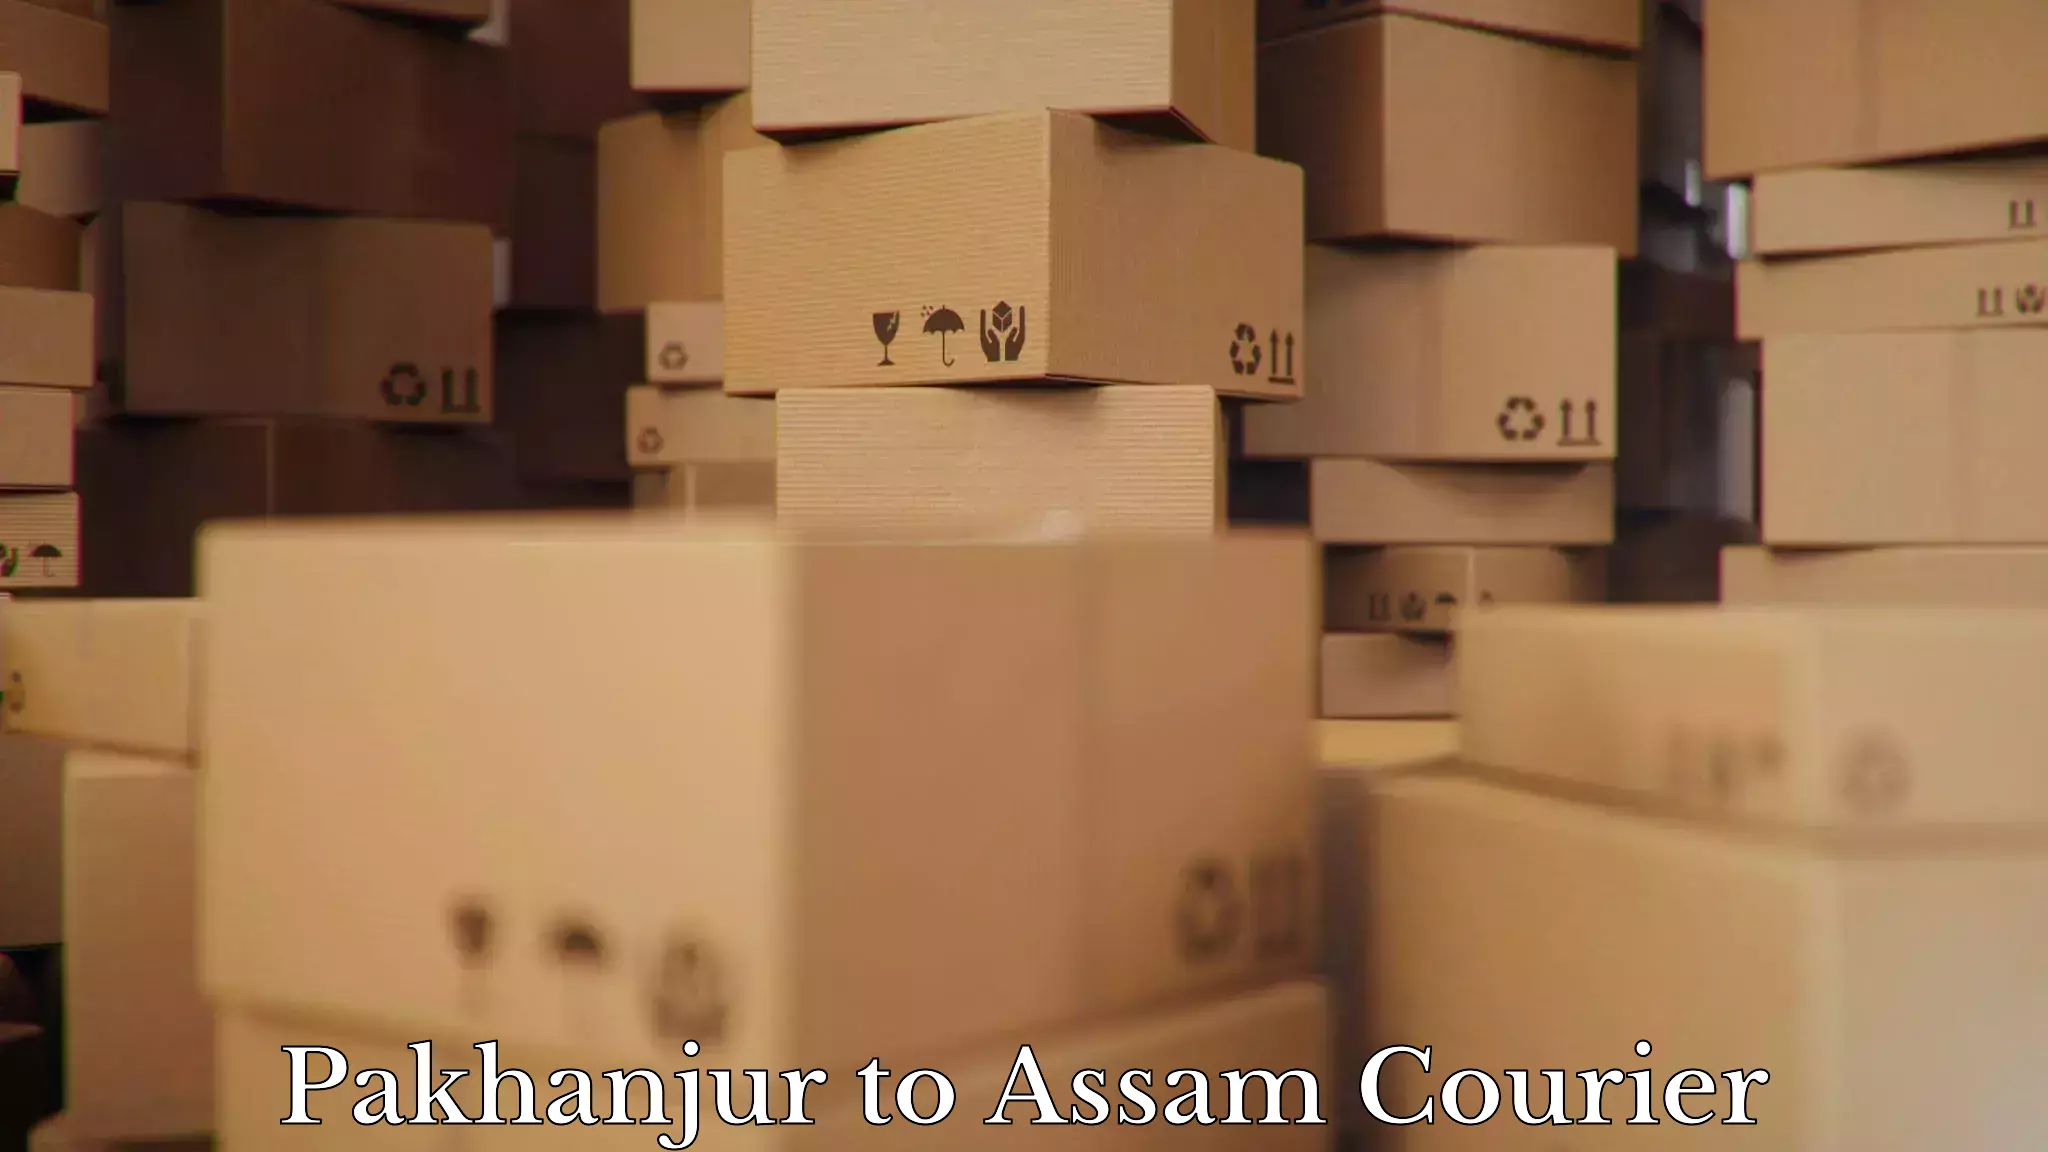 Expert moving and storage Pakhanjur to Assam